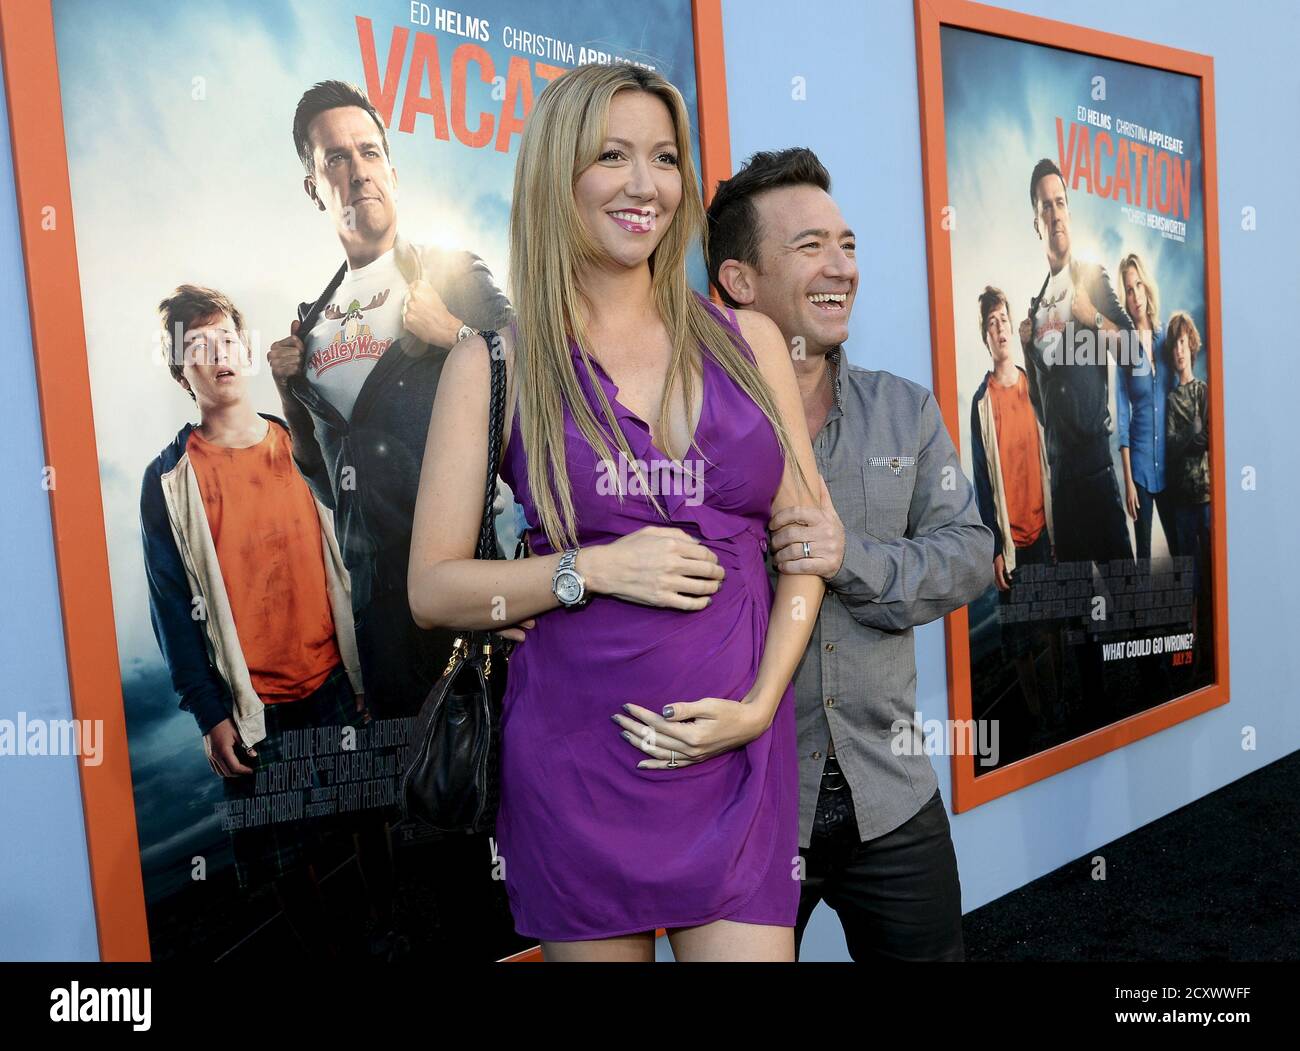 Actor David Faustino (R) and pregnant girlfriend Lindsay Bronson pose during the premiere of the film 'Vacation' at the Regency Village Theatre in the Westwood section of Los Angeles, California July 27, 2015. REUTERS/Kevork Djansezian Stock Photo